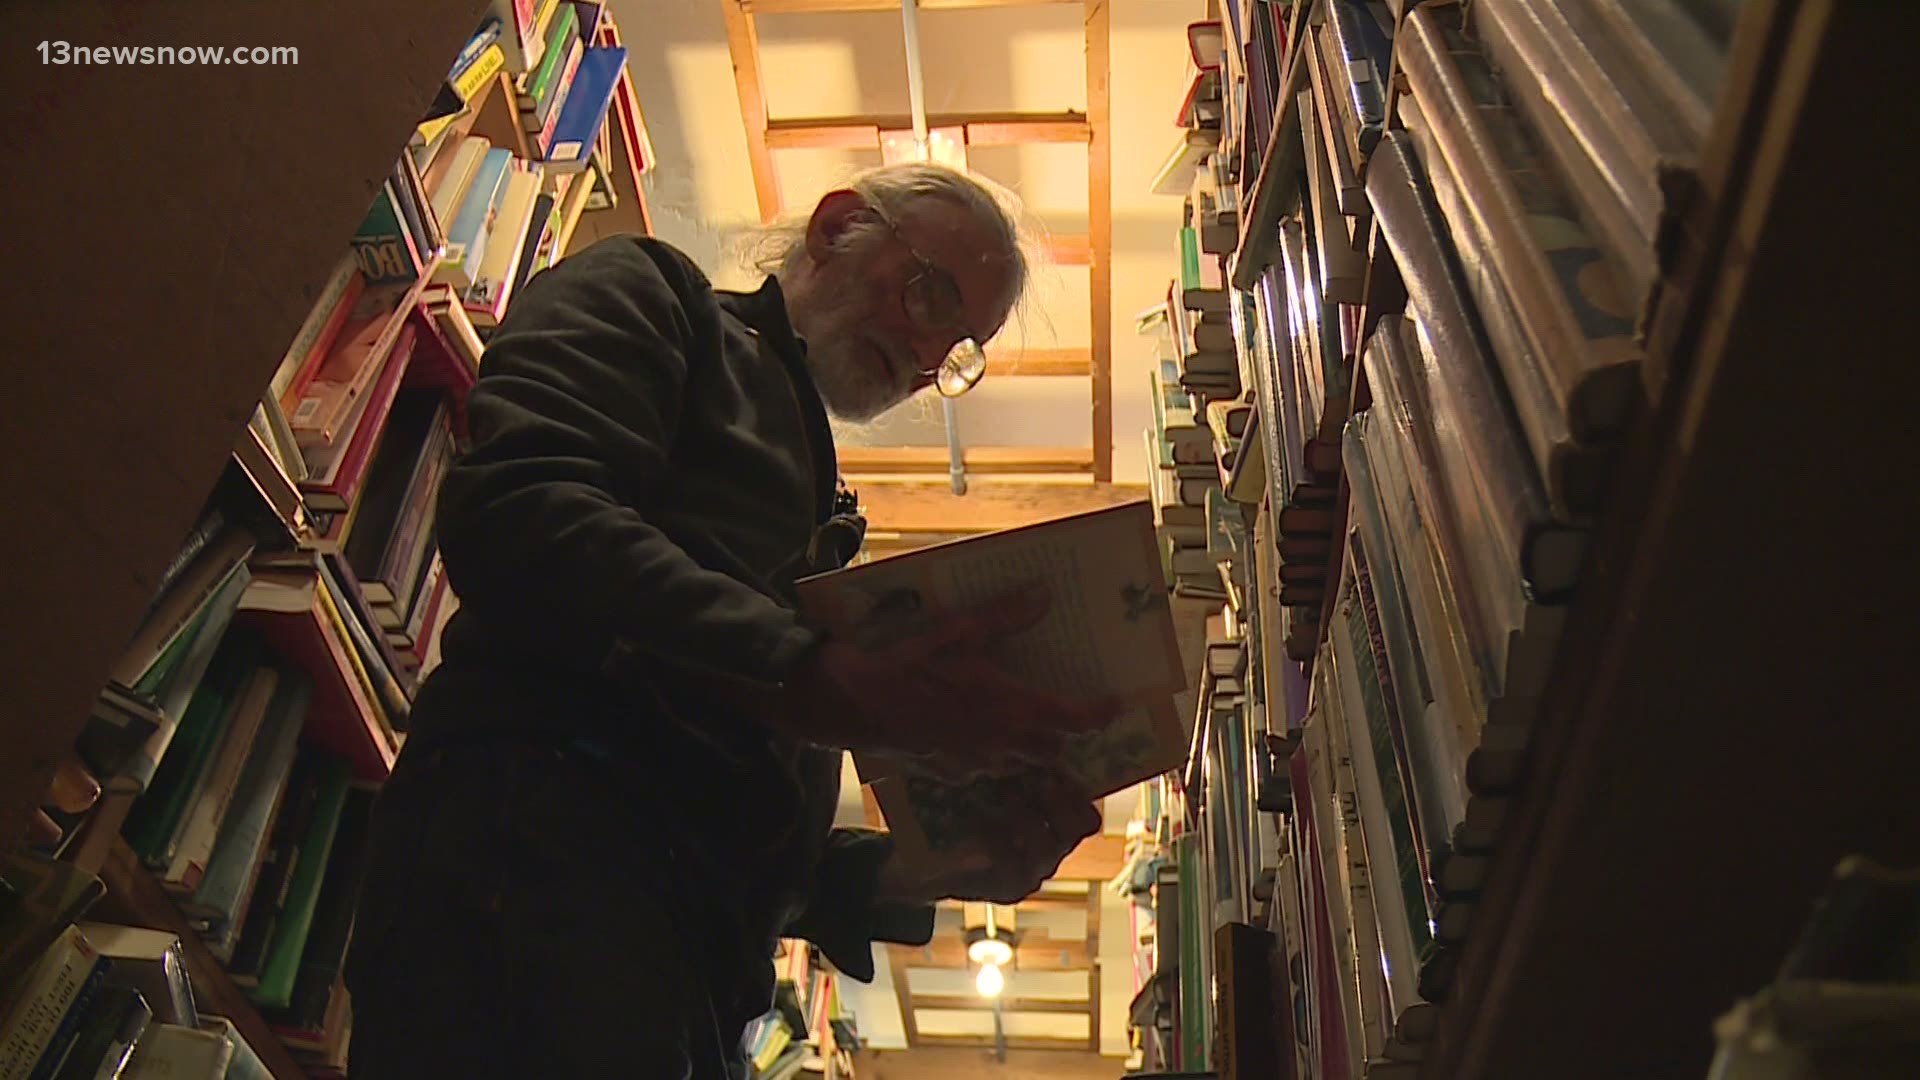 Philip Townsend explains why Beacon Books is shutting its doors at the end of the month.